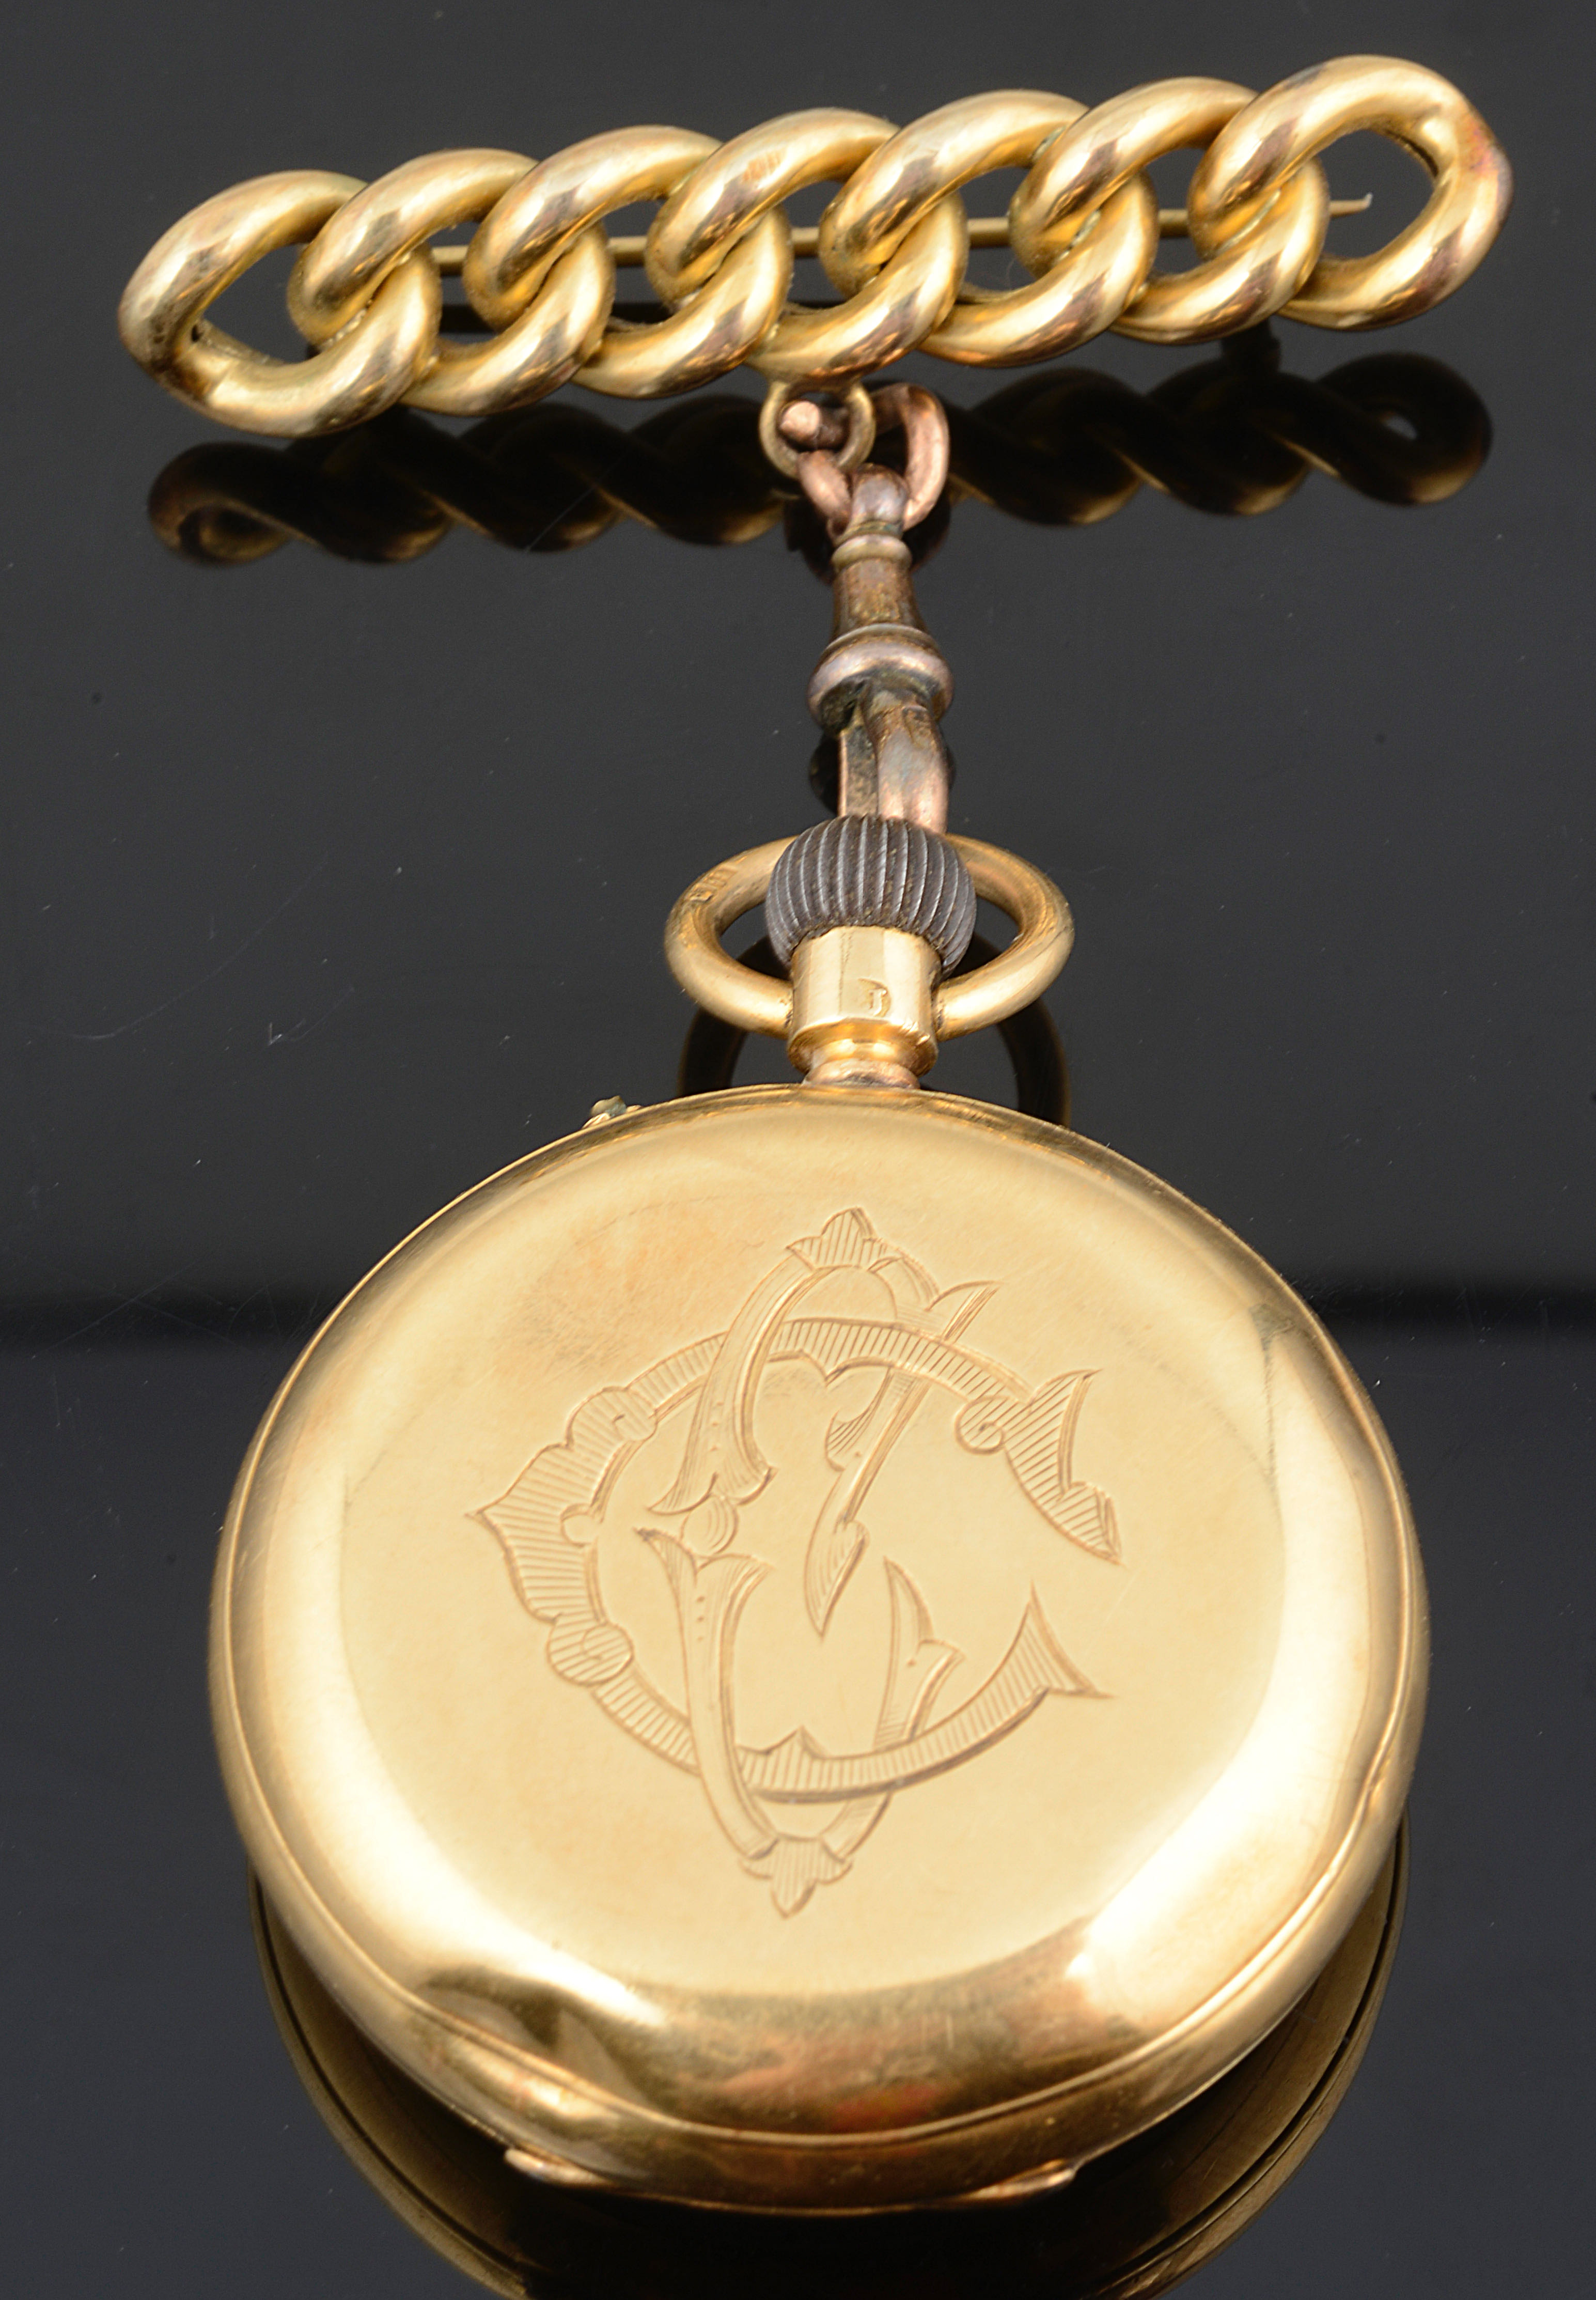 A 18ct gold J W Benson open faced ladies pocket watch with a gold curb link bar brooch - Image 2 of 2